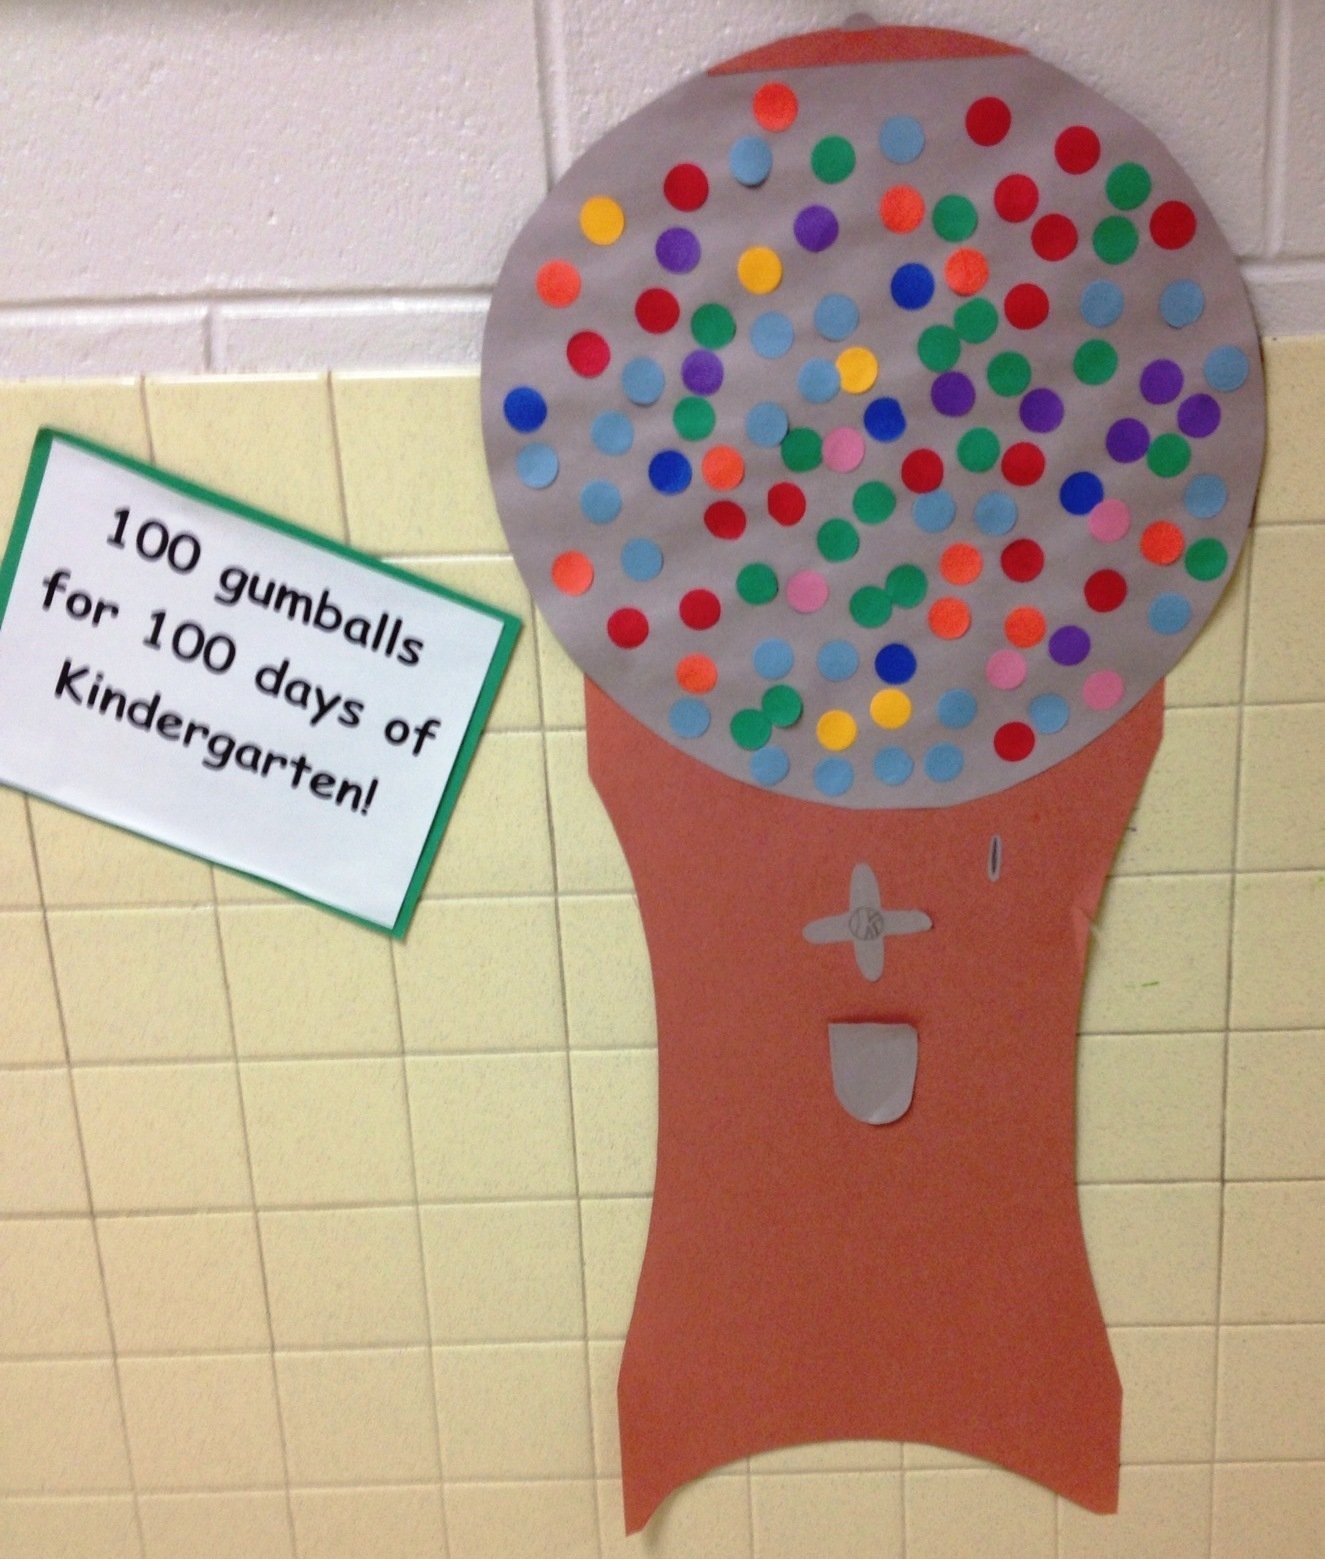 10 Attractive 100Th Day Of School Ideas For Kindergarten kindergarten is crazy fun the 100th day of kindergarten 3 2022